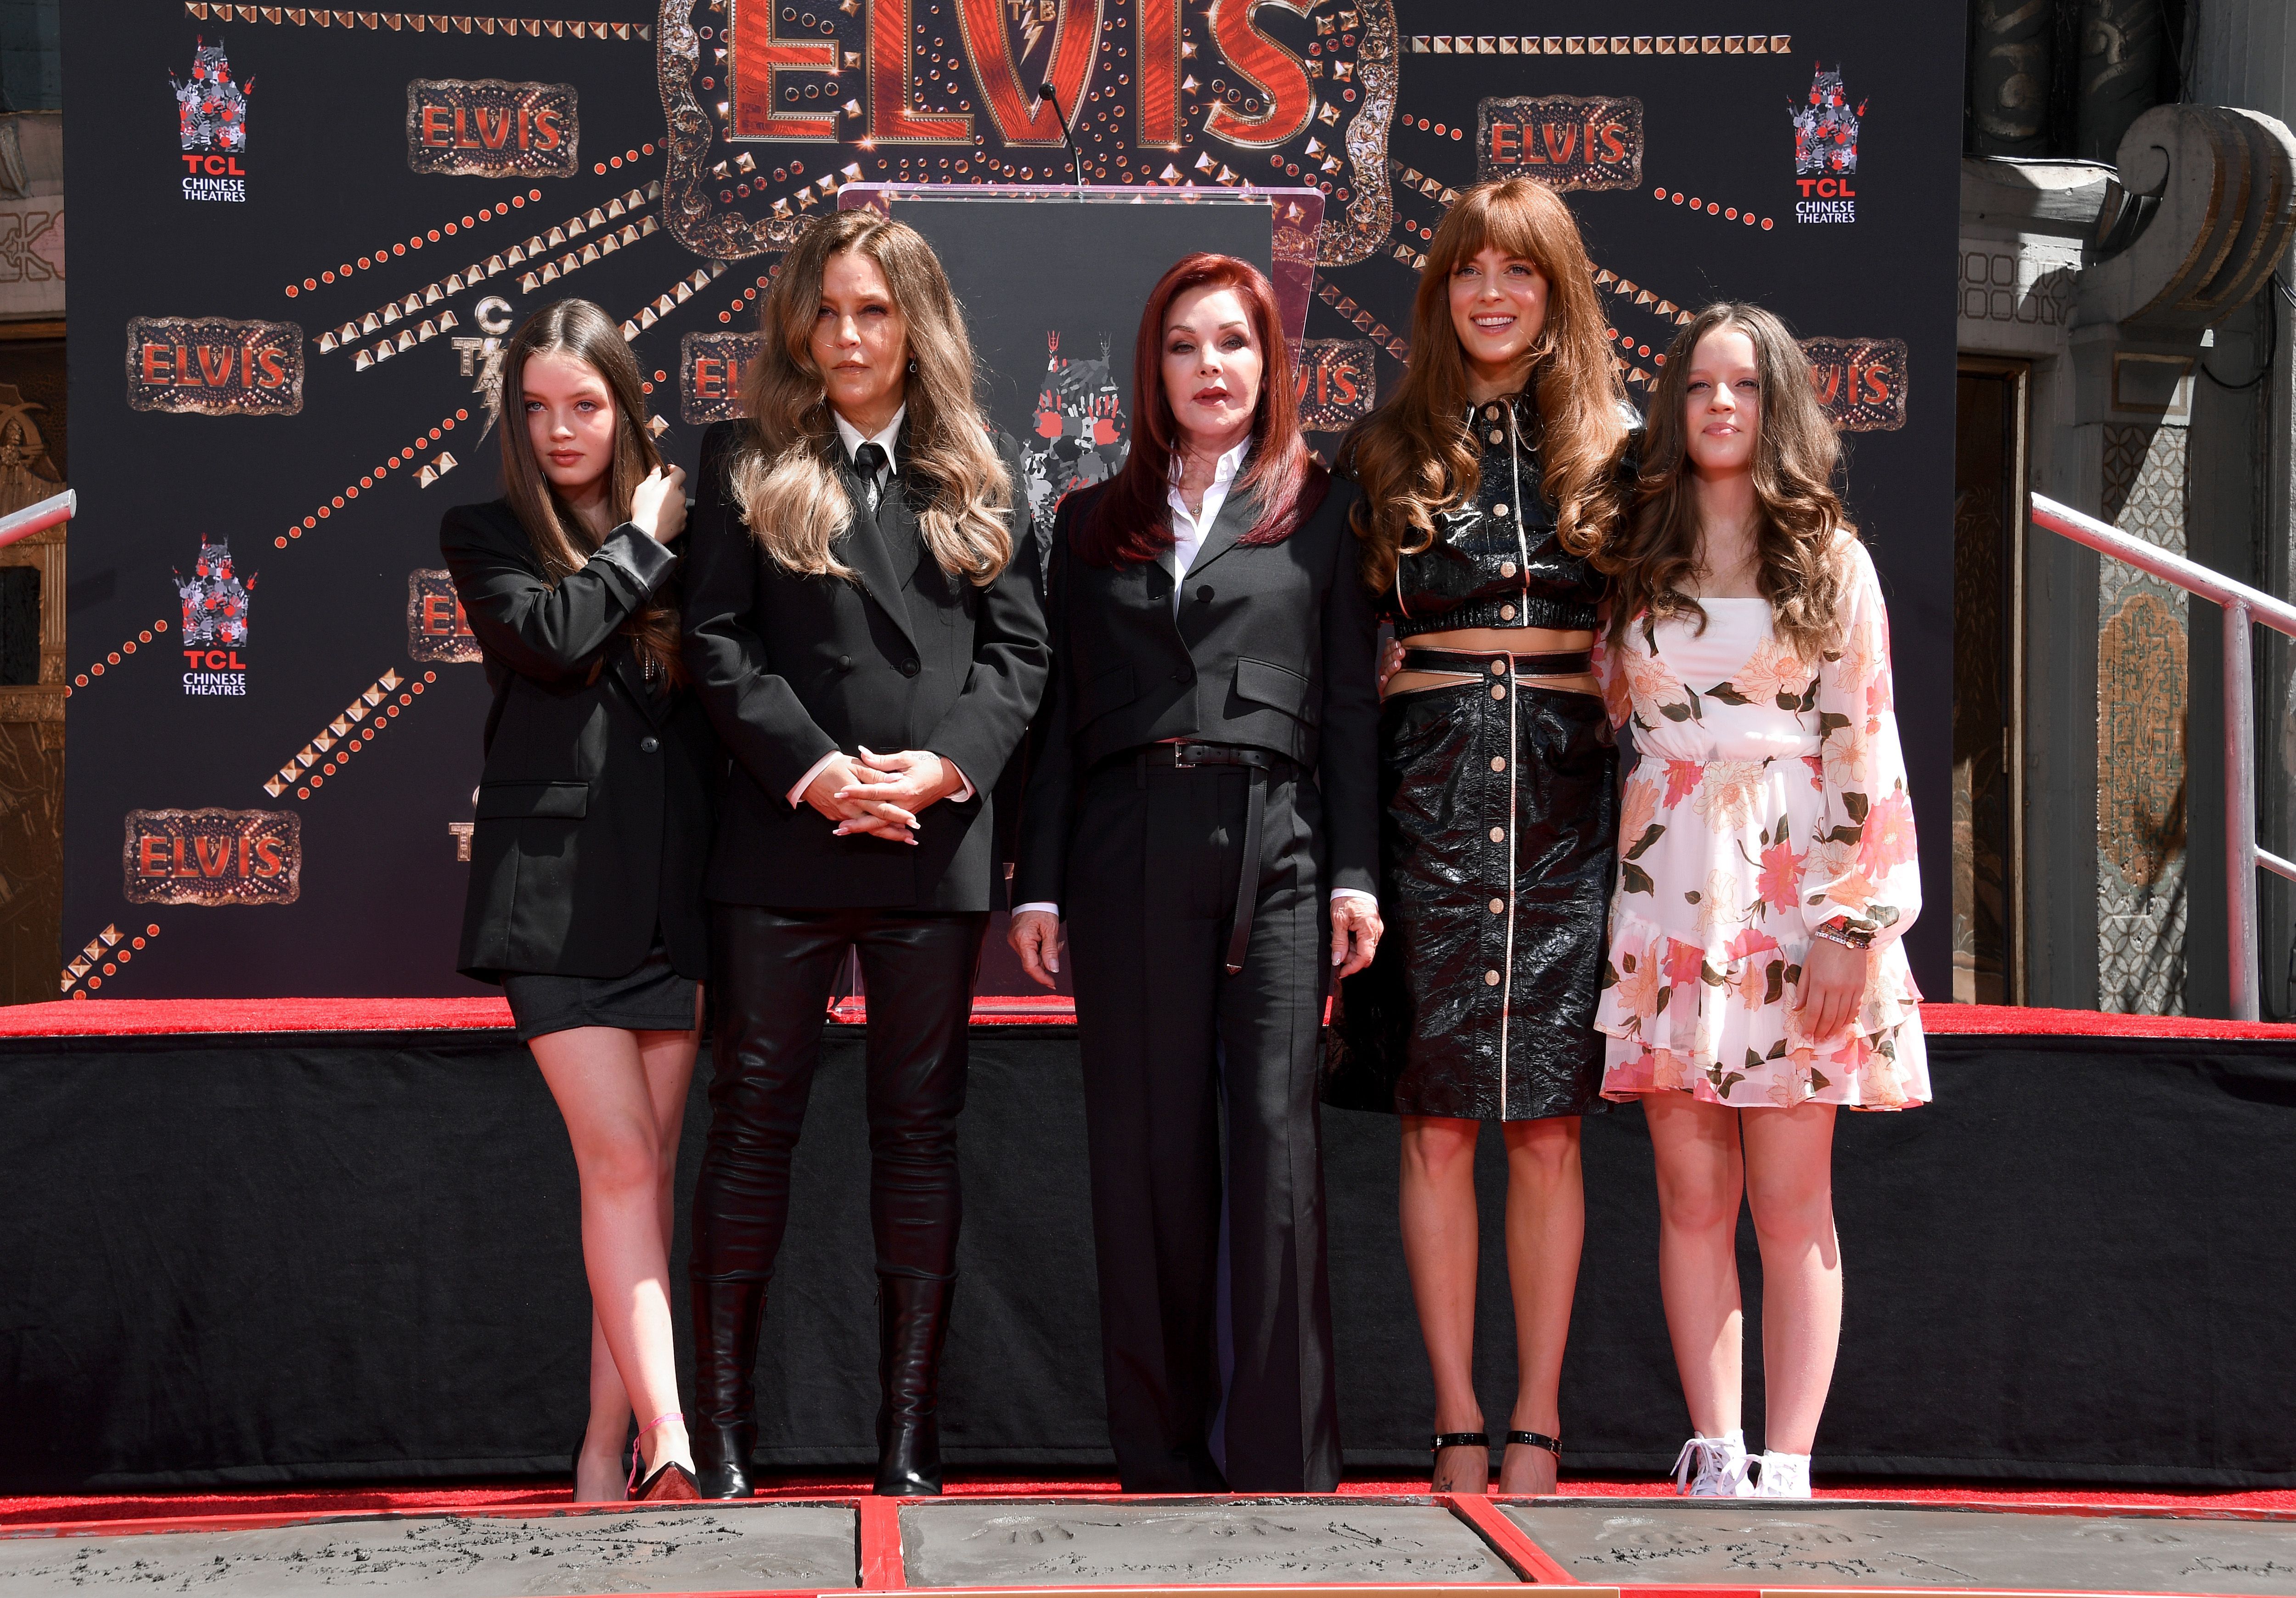 Harper Lockwood, Lisa Marie Presley, Priscilla Presley, Riley Keough, and Finley Lockwood at the Handprint Ceremony at TCL Chinese Theatre on June 21, 2022 in Hollywood, California. | Source: Getty Images